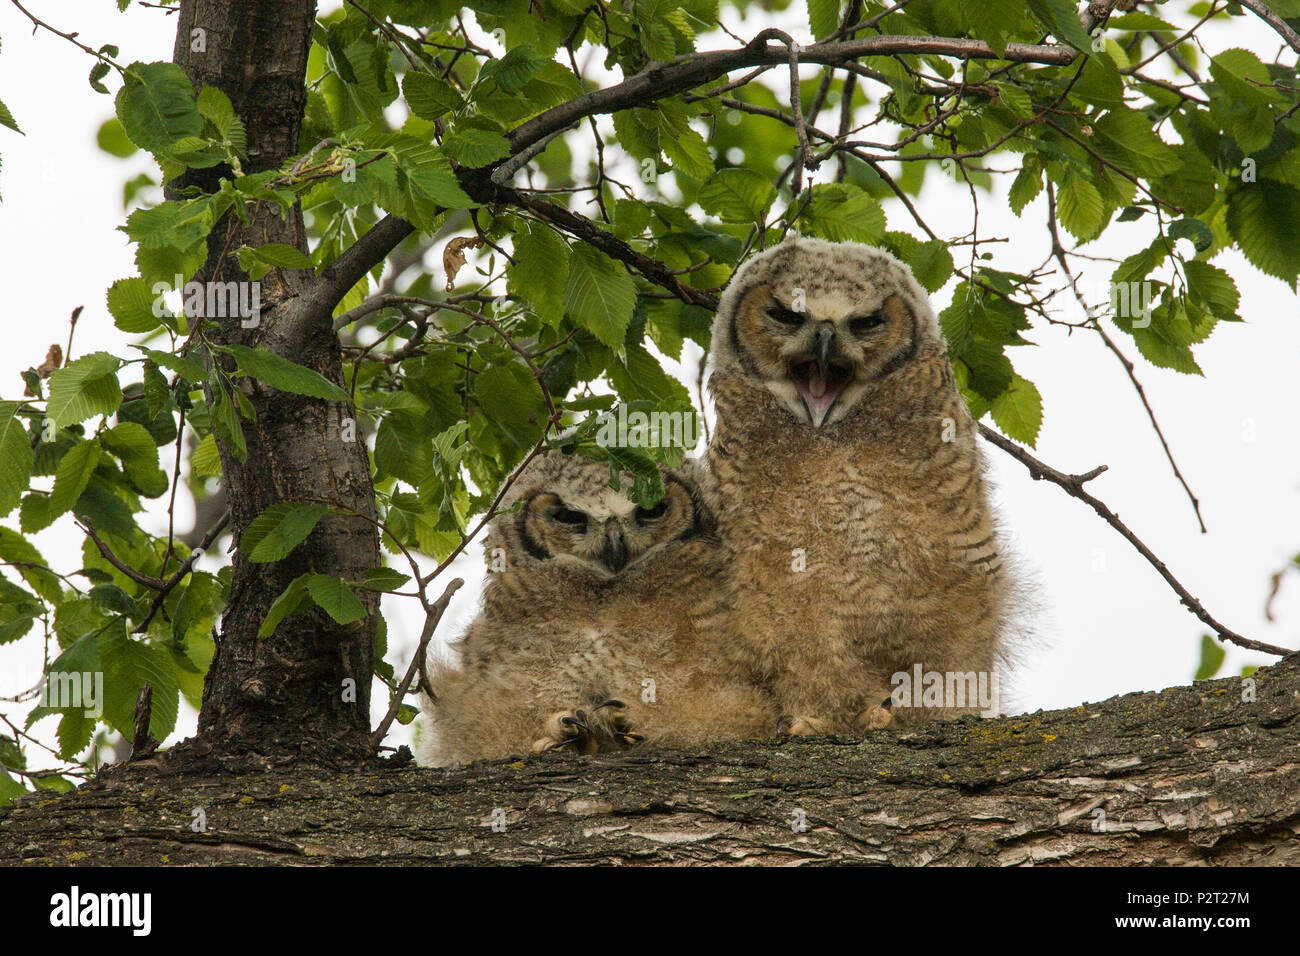 A great horned owlet (Bubo virginianus) shows its gape with a wide mouthed yawn by dozing sibling. Owlets start branching from nest at 5 weeks. Stock Photo